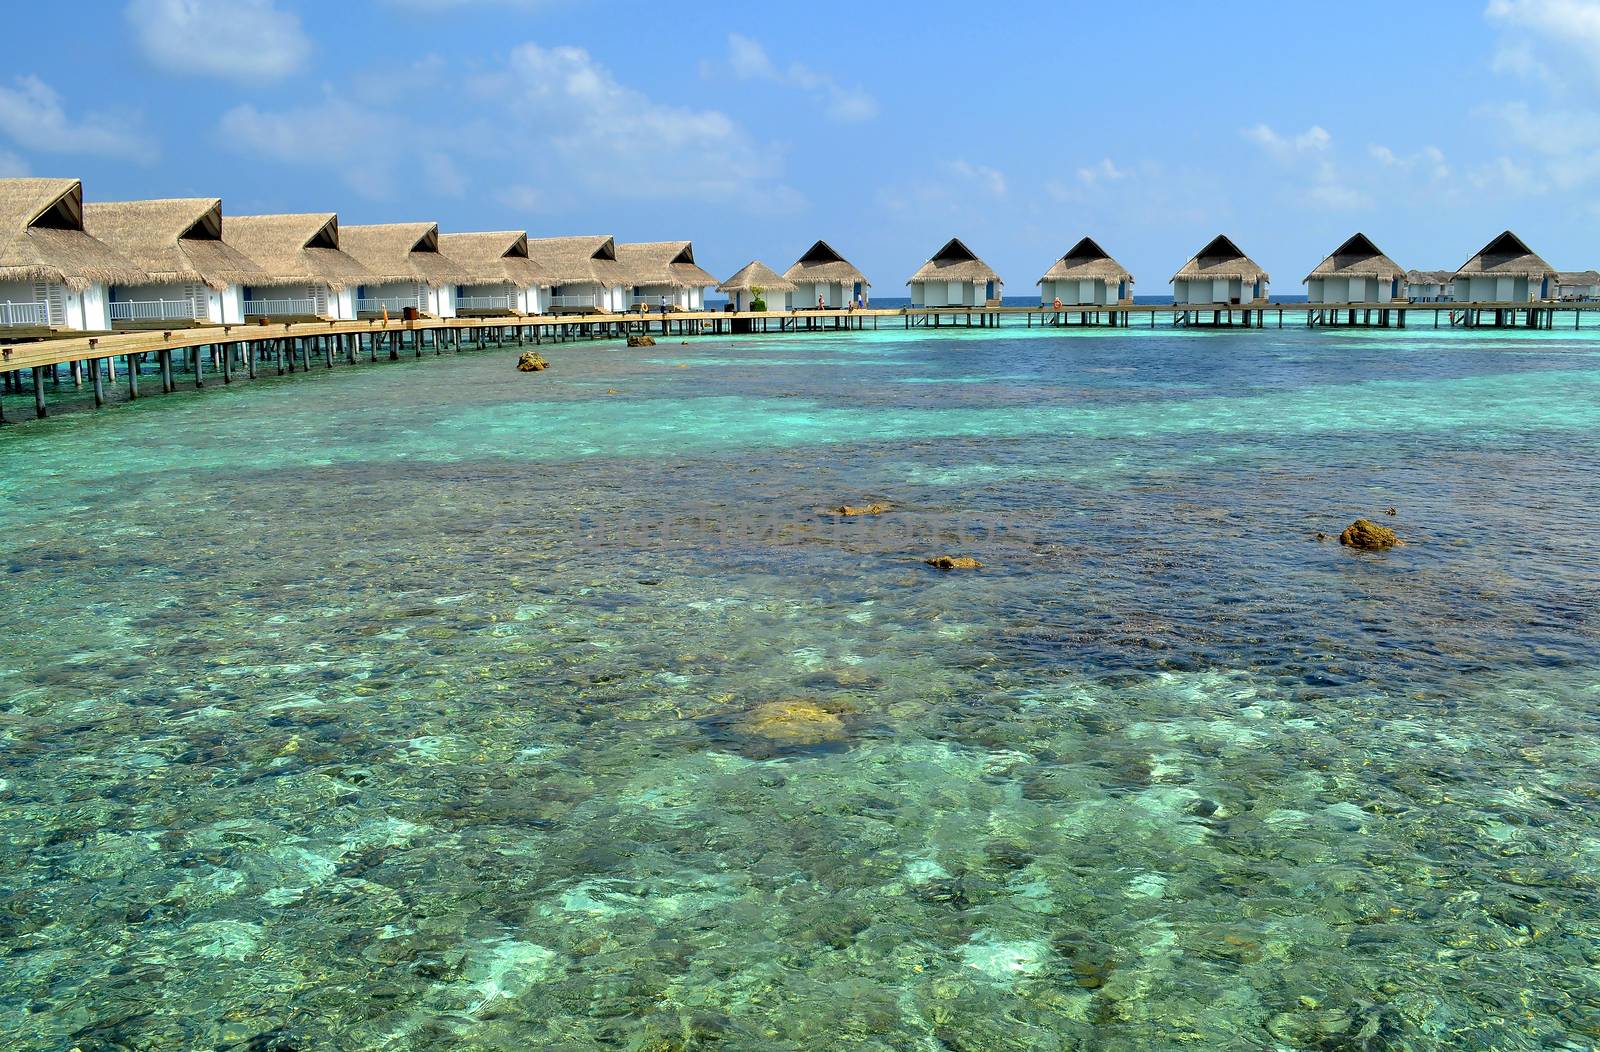 Water Villas on the cystal water with coral reef